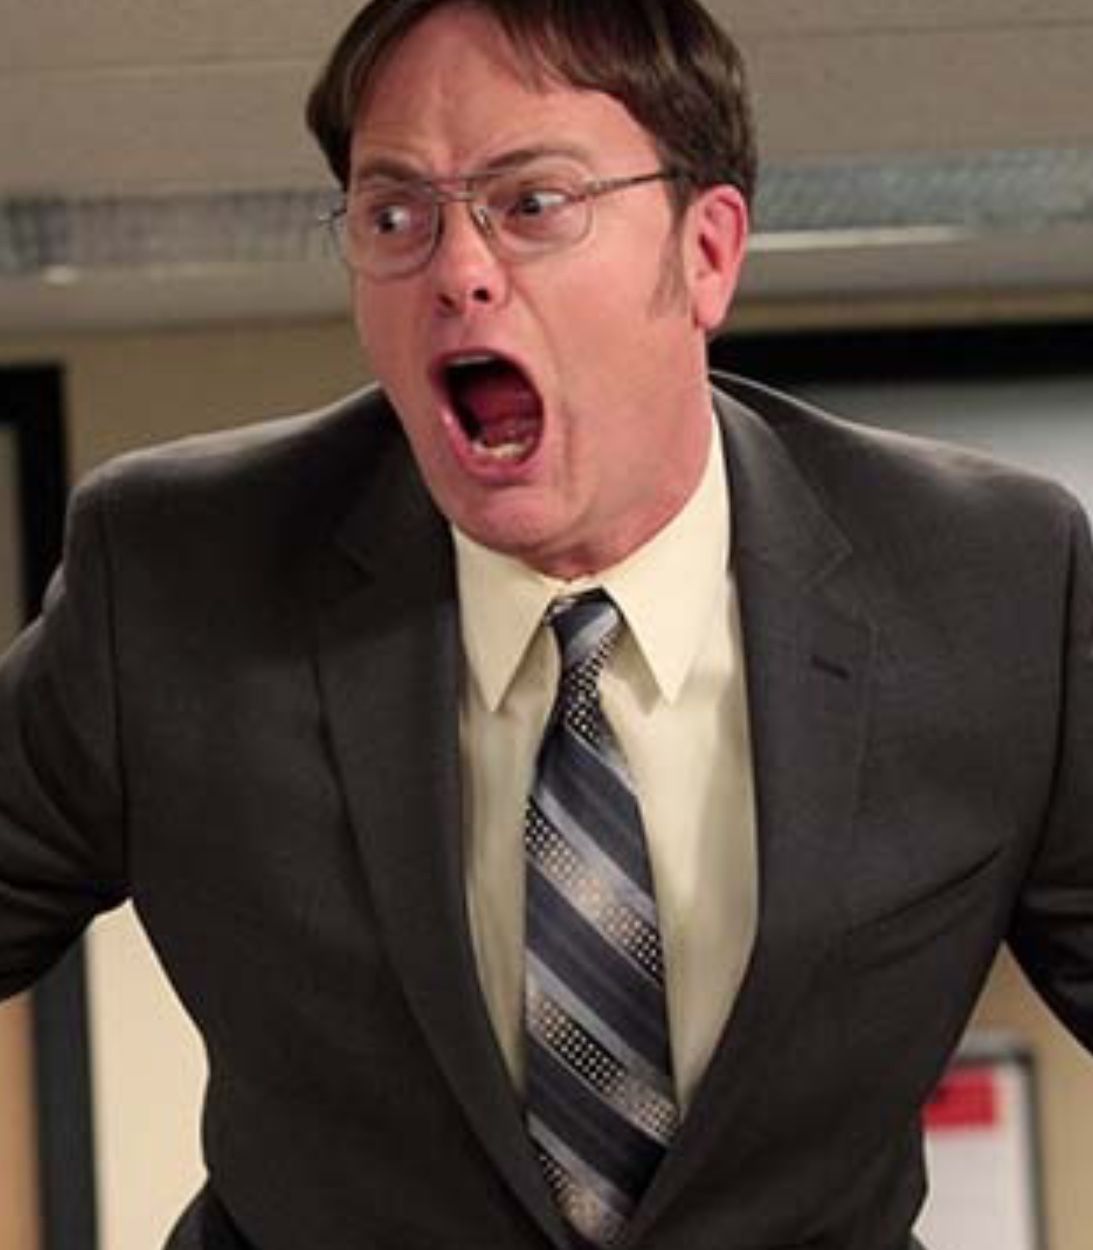 The Office Dwight vertical